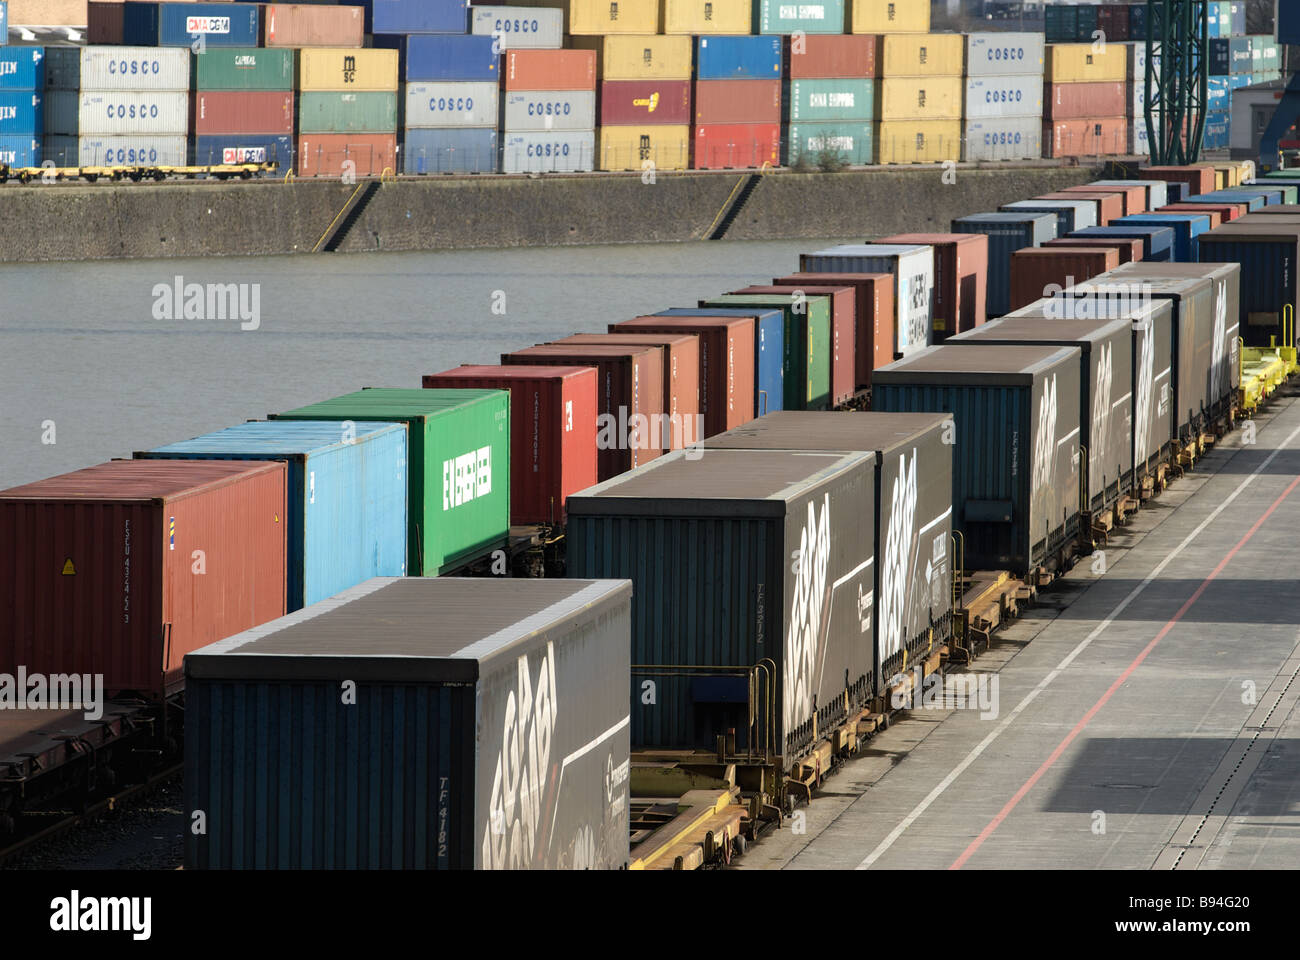 Neil 1 rail container terminal, Cologne, North Rhine-Westphalia, Germany. Stock Photo